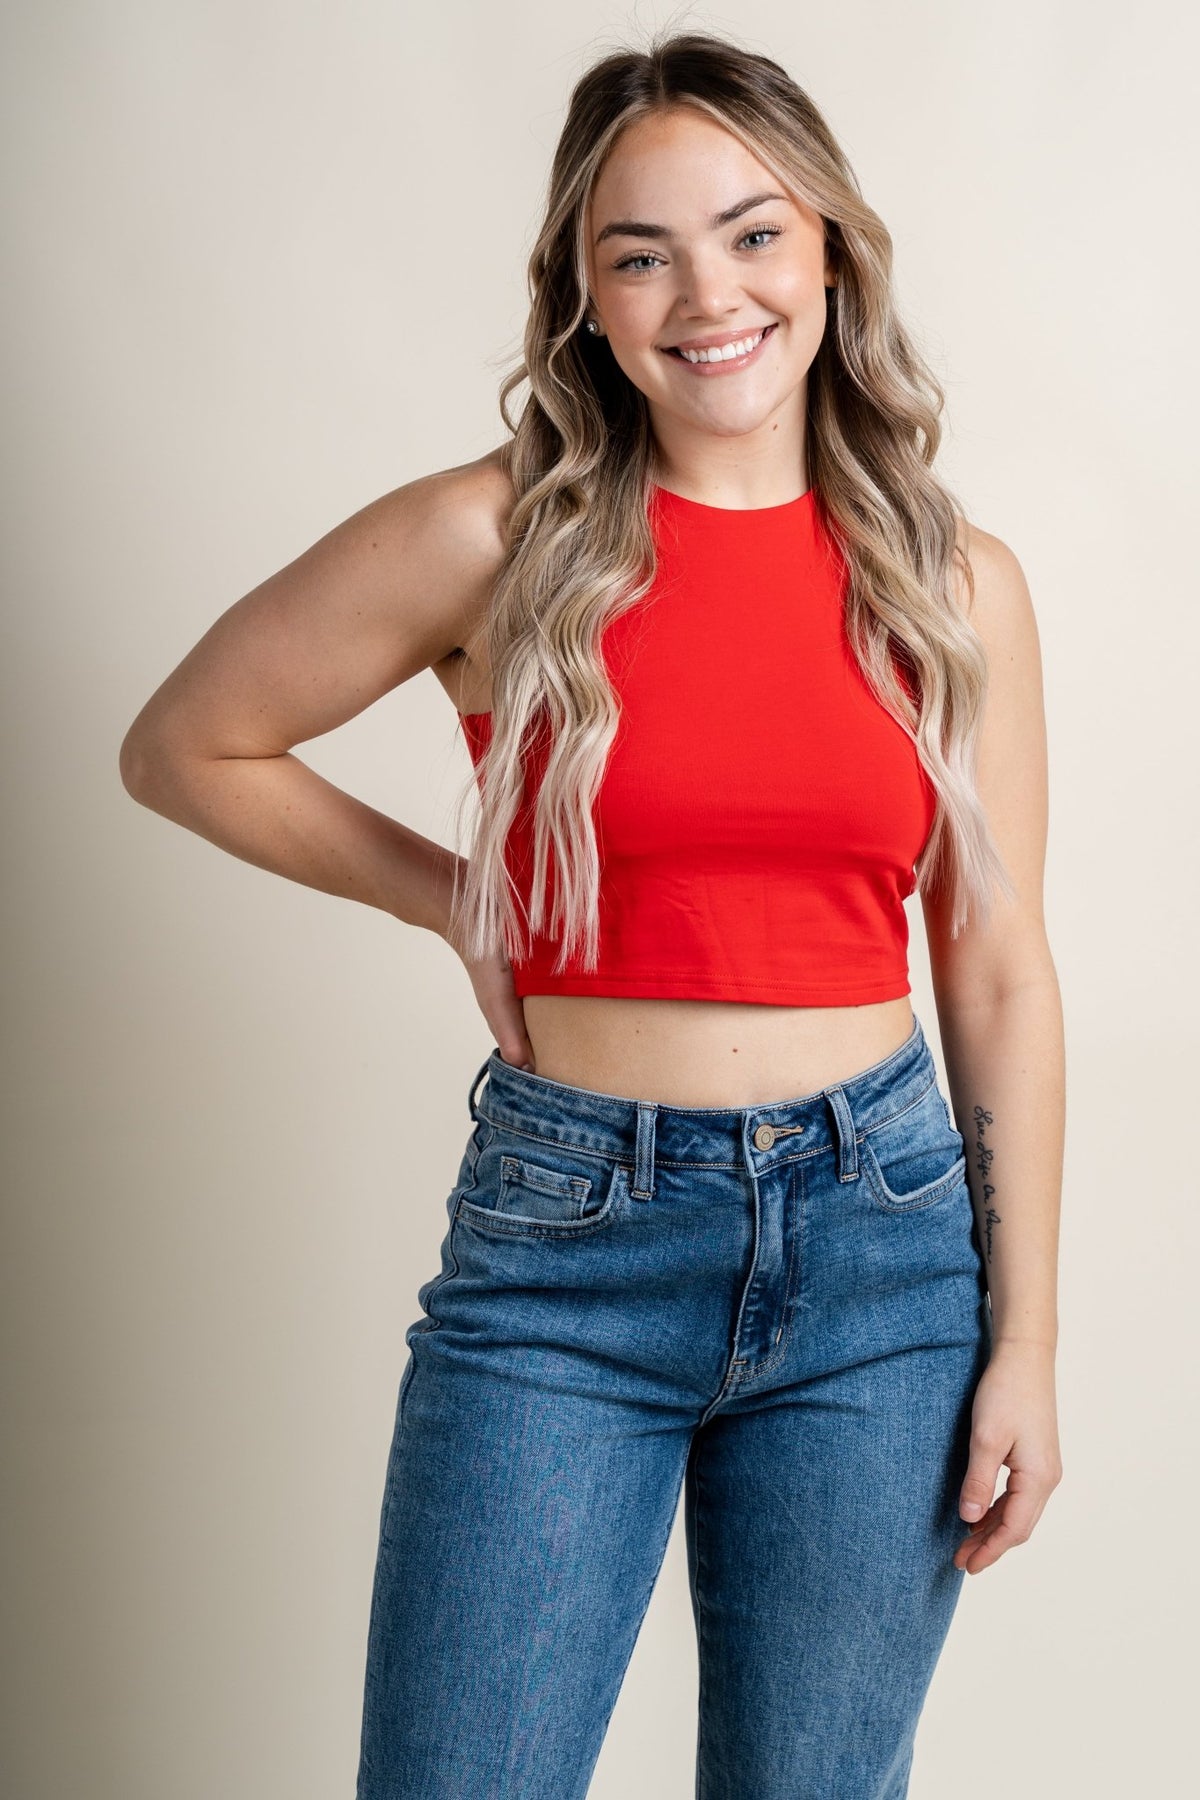 Halter crop tank top red - Cute Top - Trendy Tank Tops at Lush Fashion Lounge Boutique in Oklahoma City